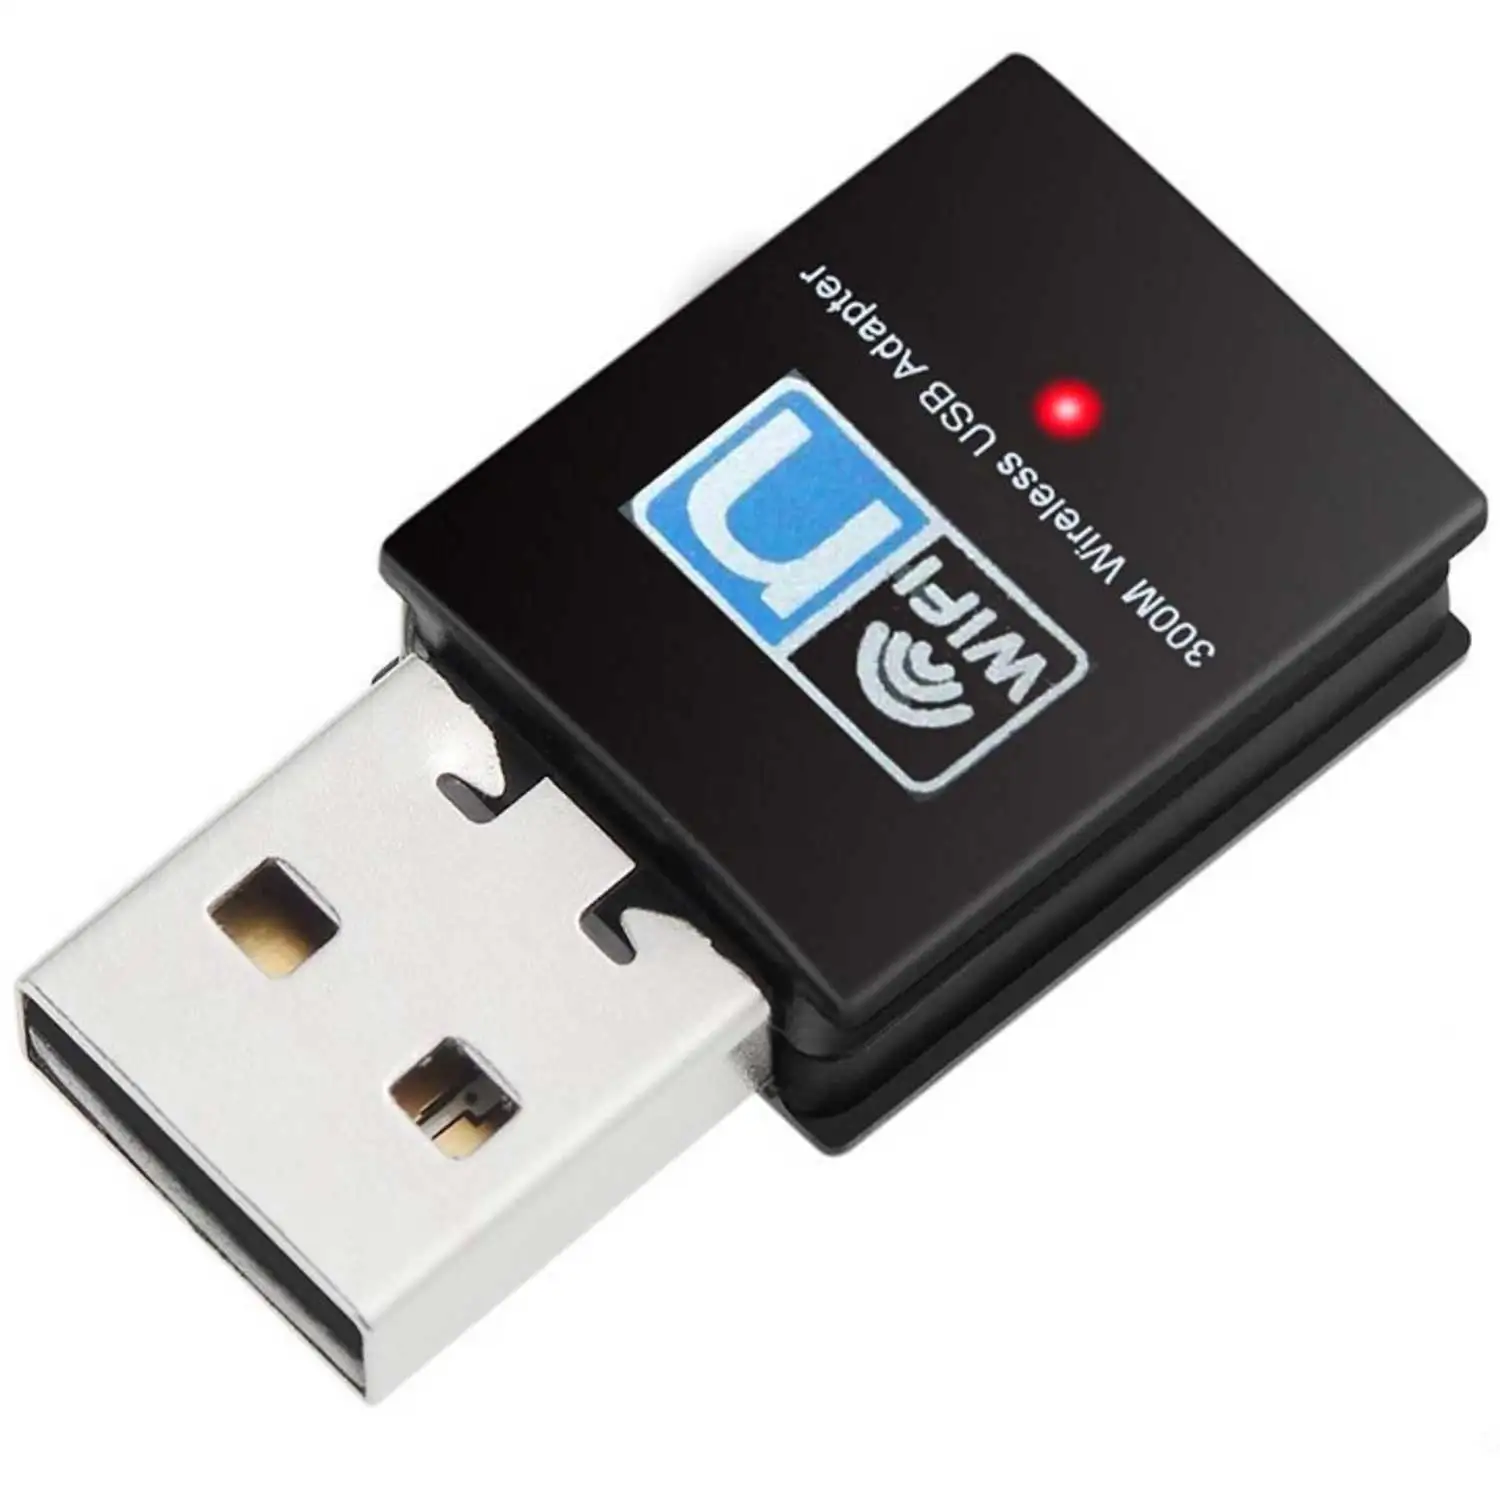 

Factory Oem Signal Receiver 11Ac Free Driver 150Mbps Wireless Usb 5Ghz Antenna Usb Adapter Wifi Dongle